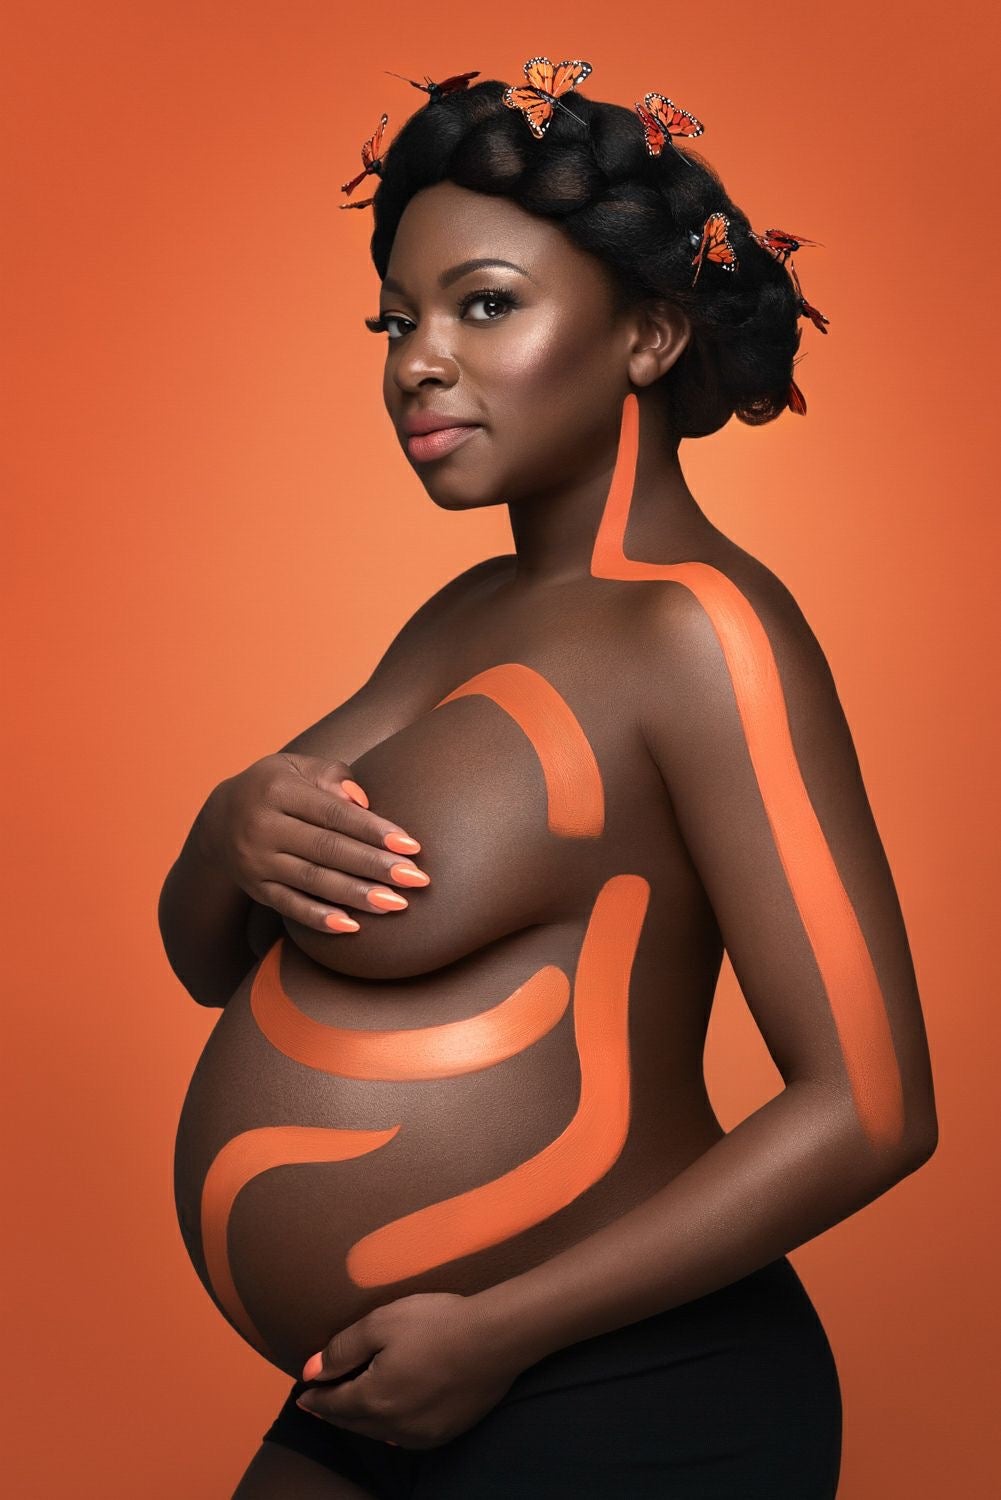 EXCLUSIVE: Naturi Naughton's Baby Bump Photo Shoot Is An Ode To Black Culture
